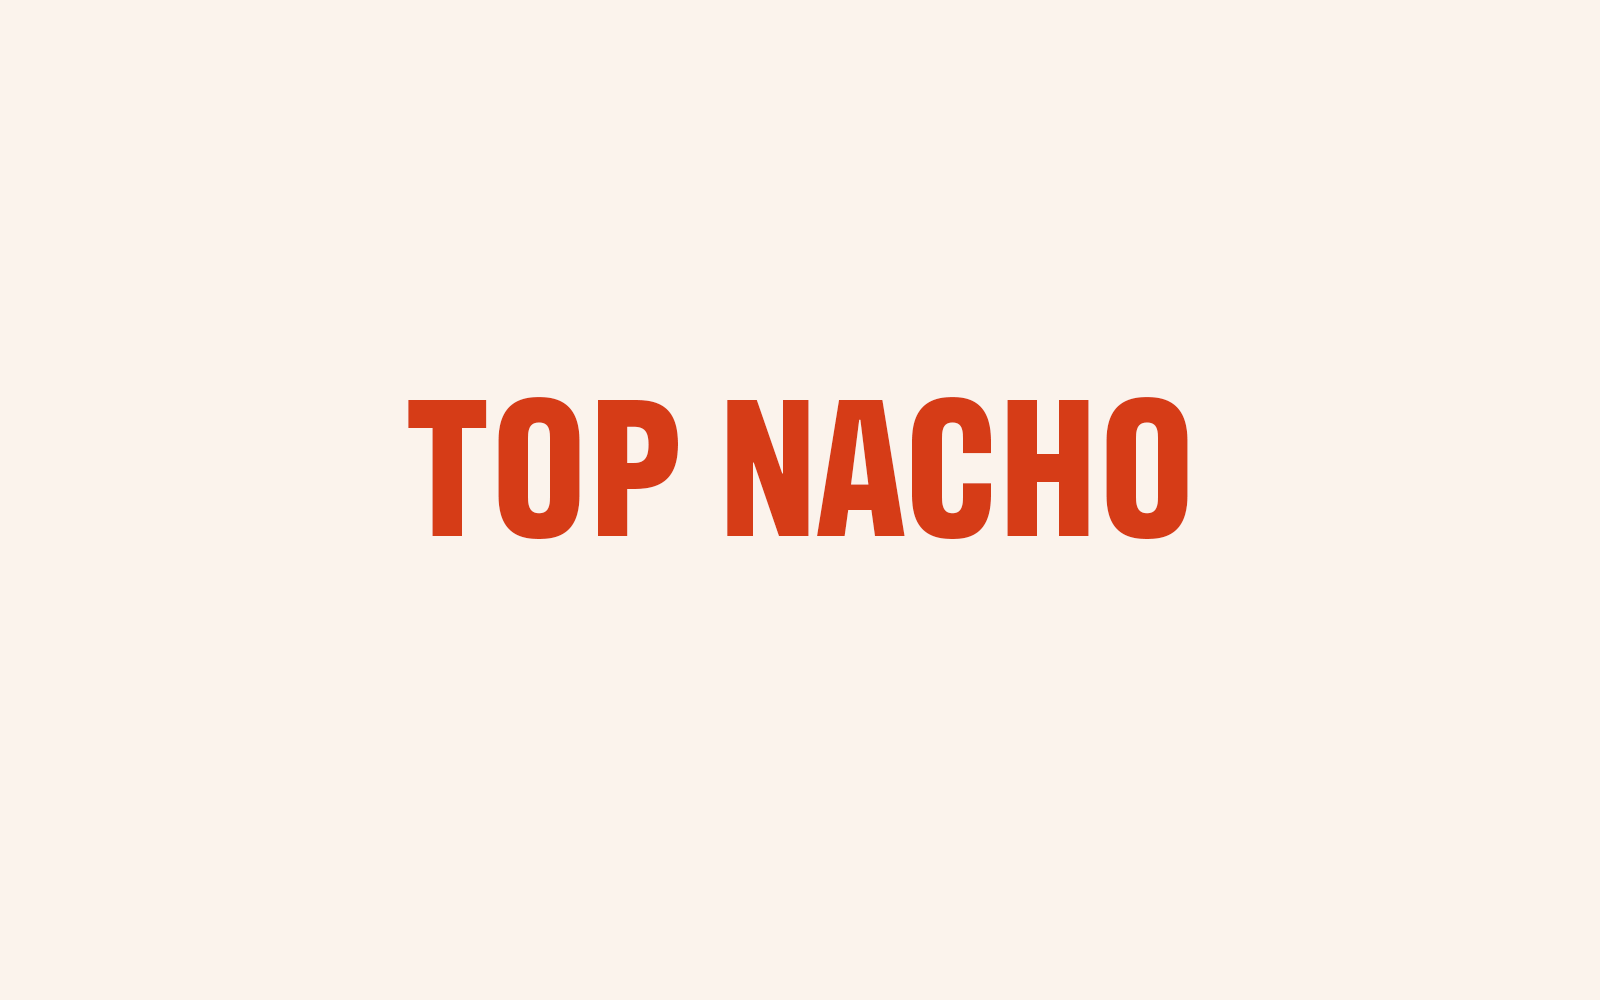 Animated gif showing different name options for Loaded, including Top Nacho, Crunched, FlagChip, FwiendChip and Tall Order